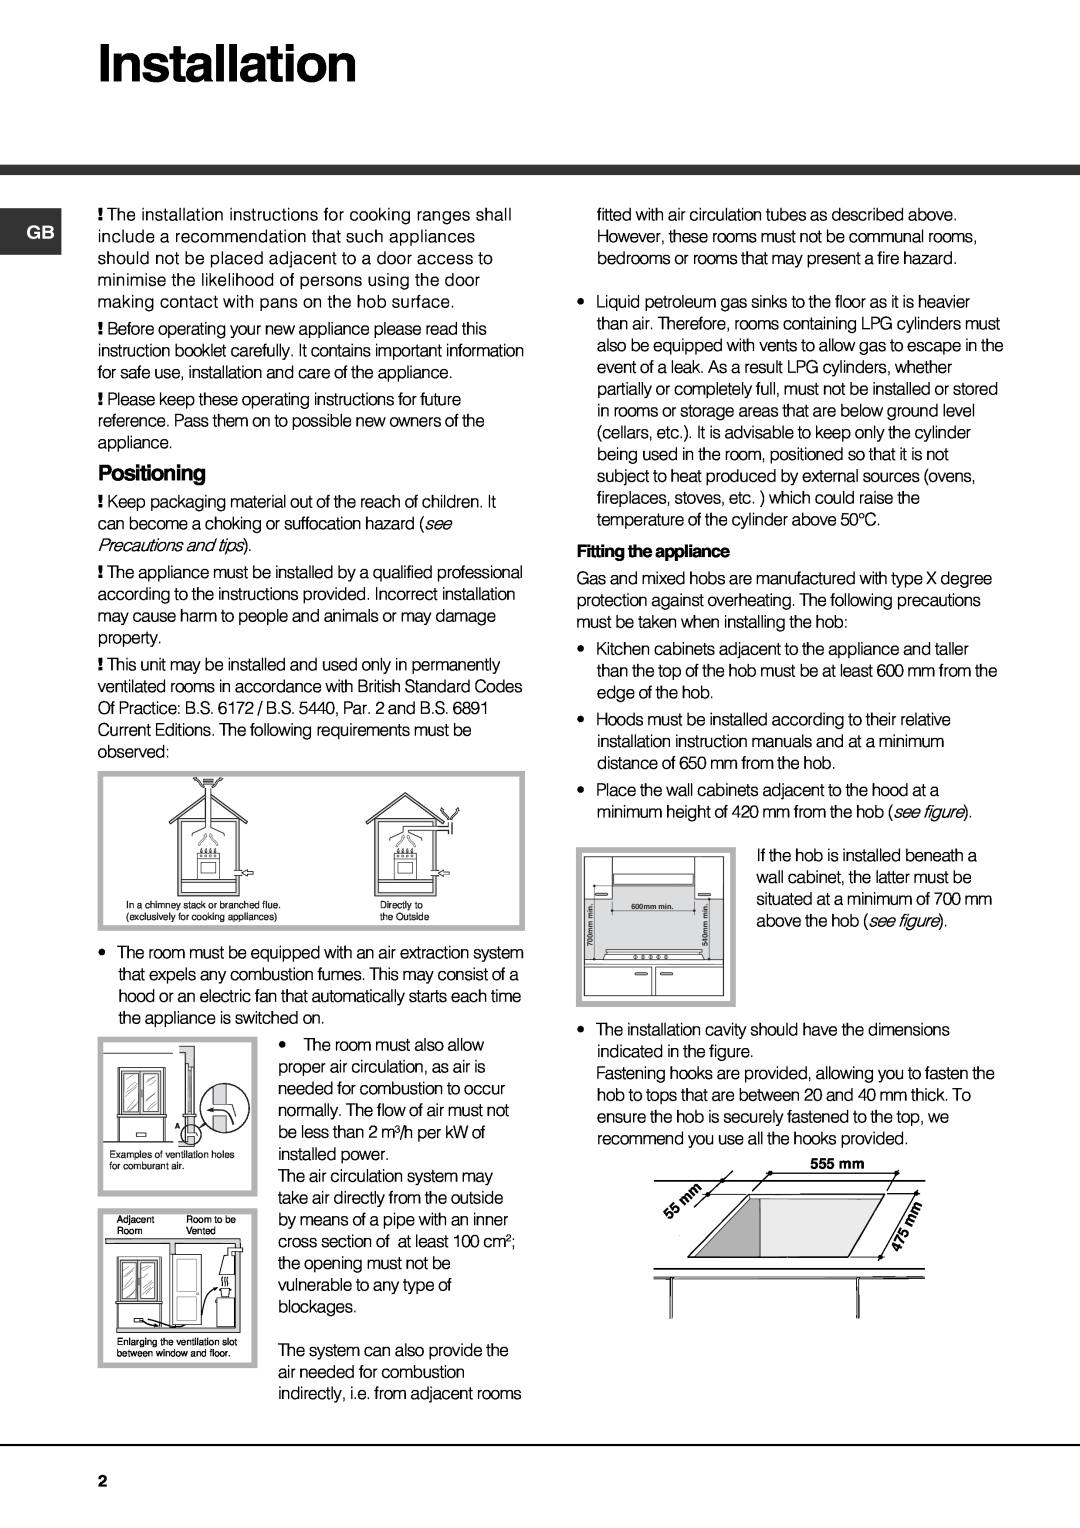 Hotpoint GE750DX operating instructions Installation, Positioning 